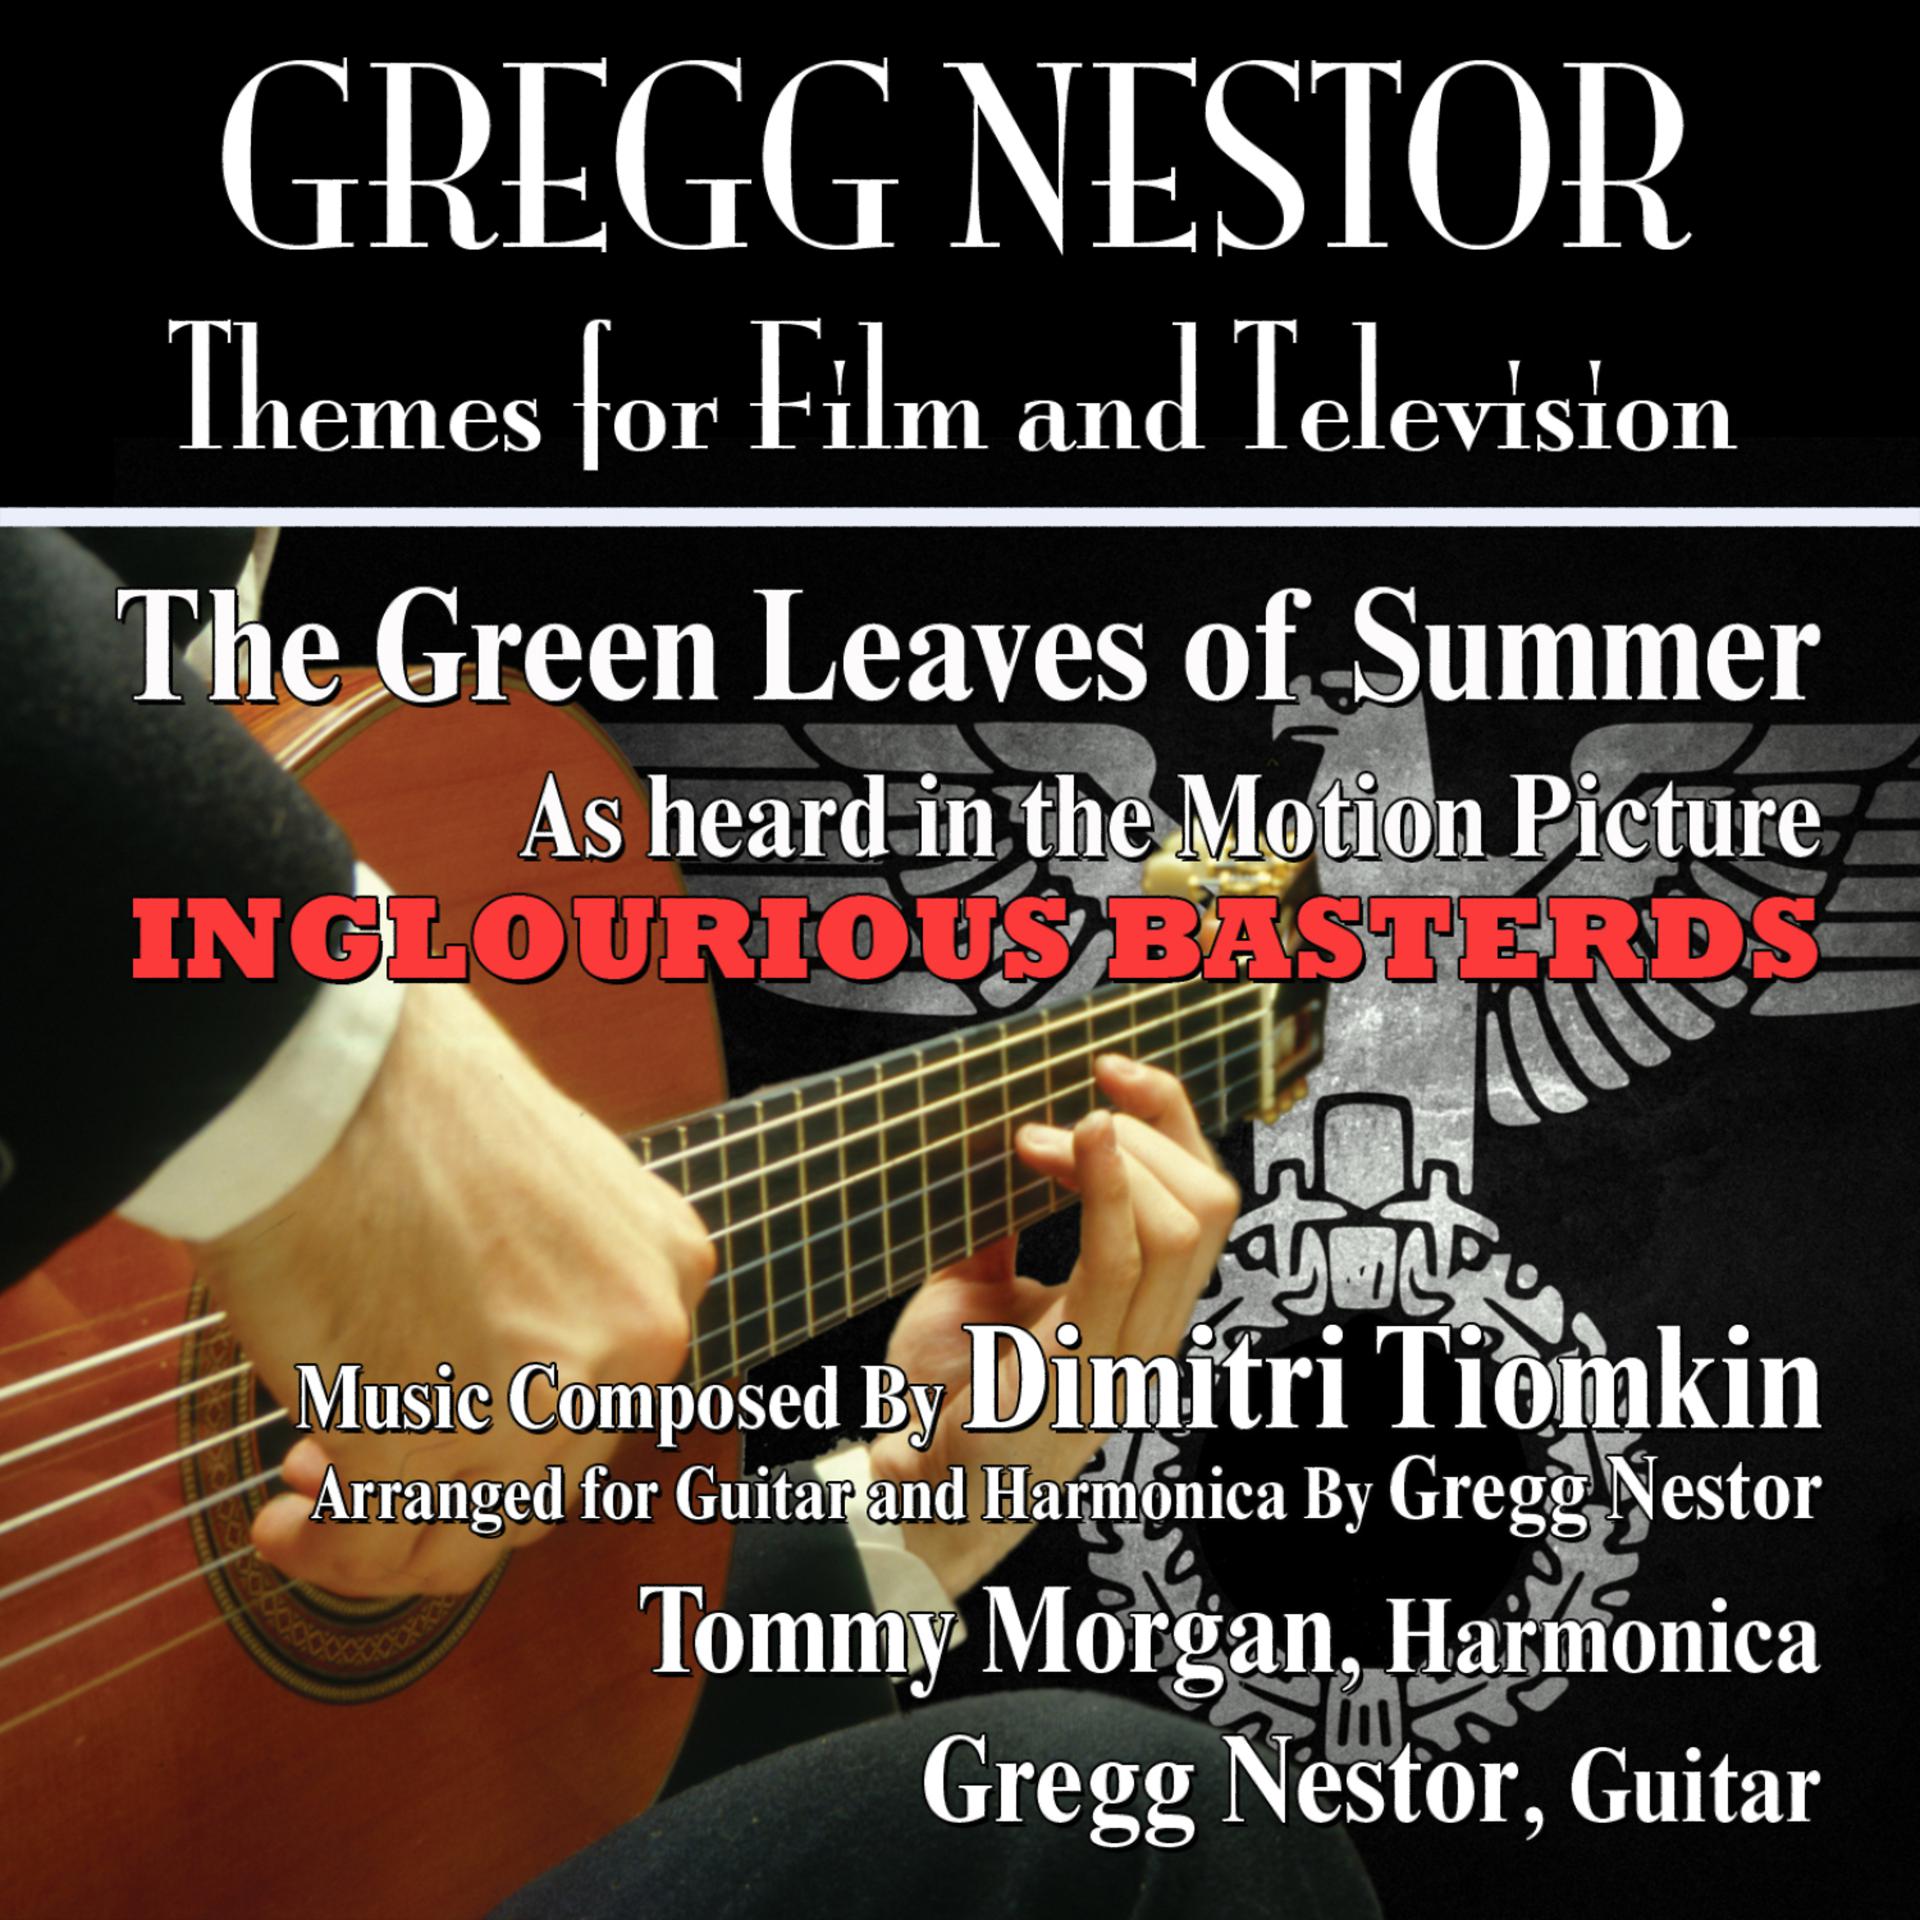 Постер альбома "The Green Leaves Of Summer" - Main Theme from "Inglourious Basterds" (Ennio Morricone)